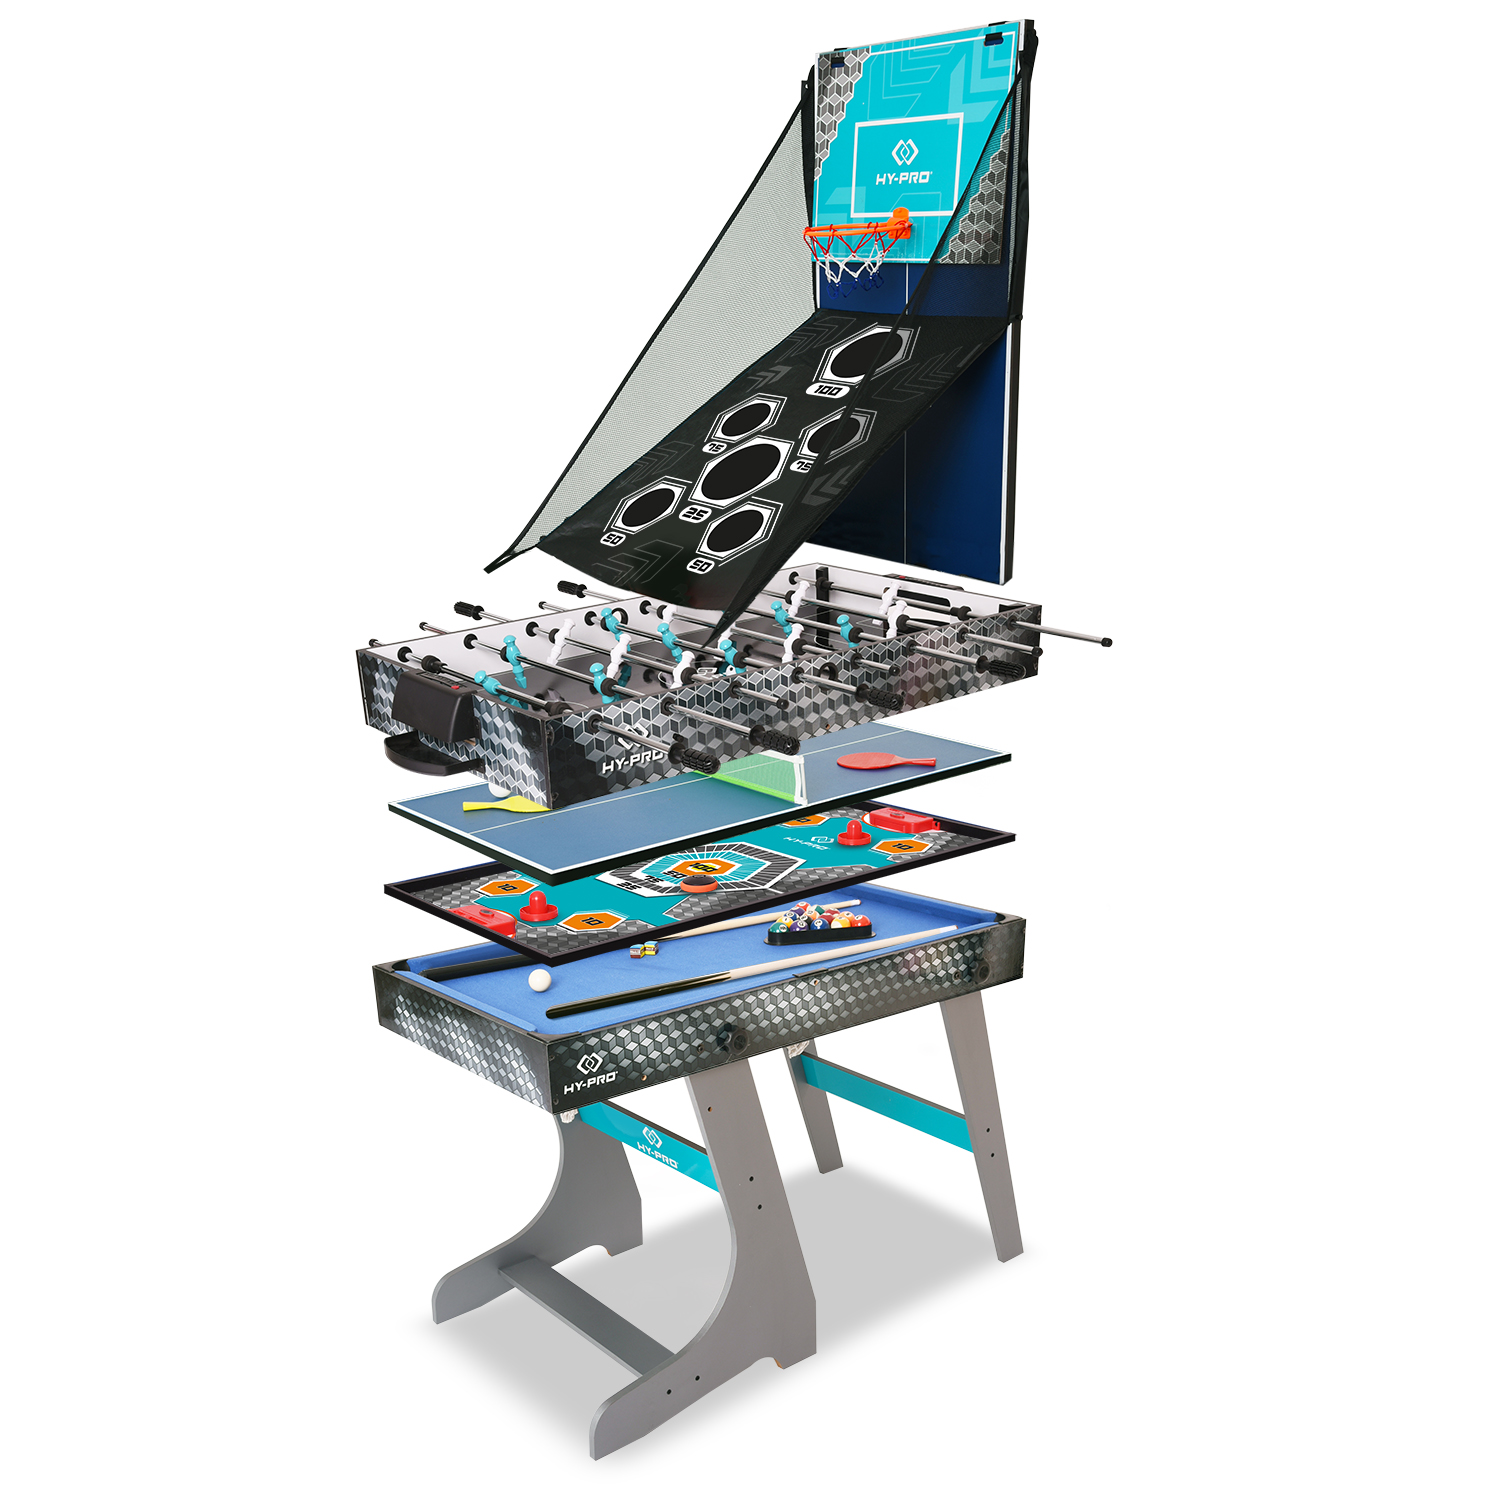 HY-PRO 8-in-1 Folding Combo Game Table (Football, Table Tennis, Pool, Hockey, Archery, Darts, Bean Bag Toss, Basketball) - image 1 of 11